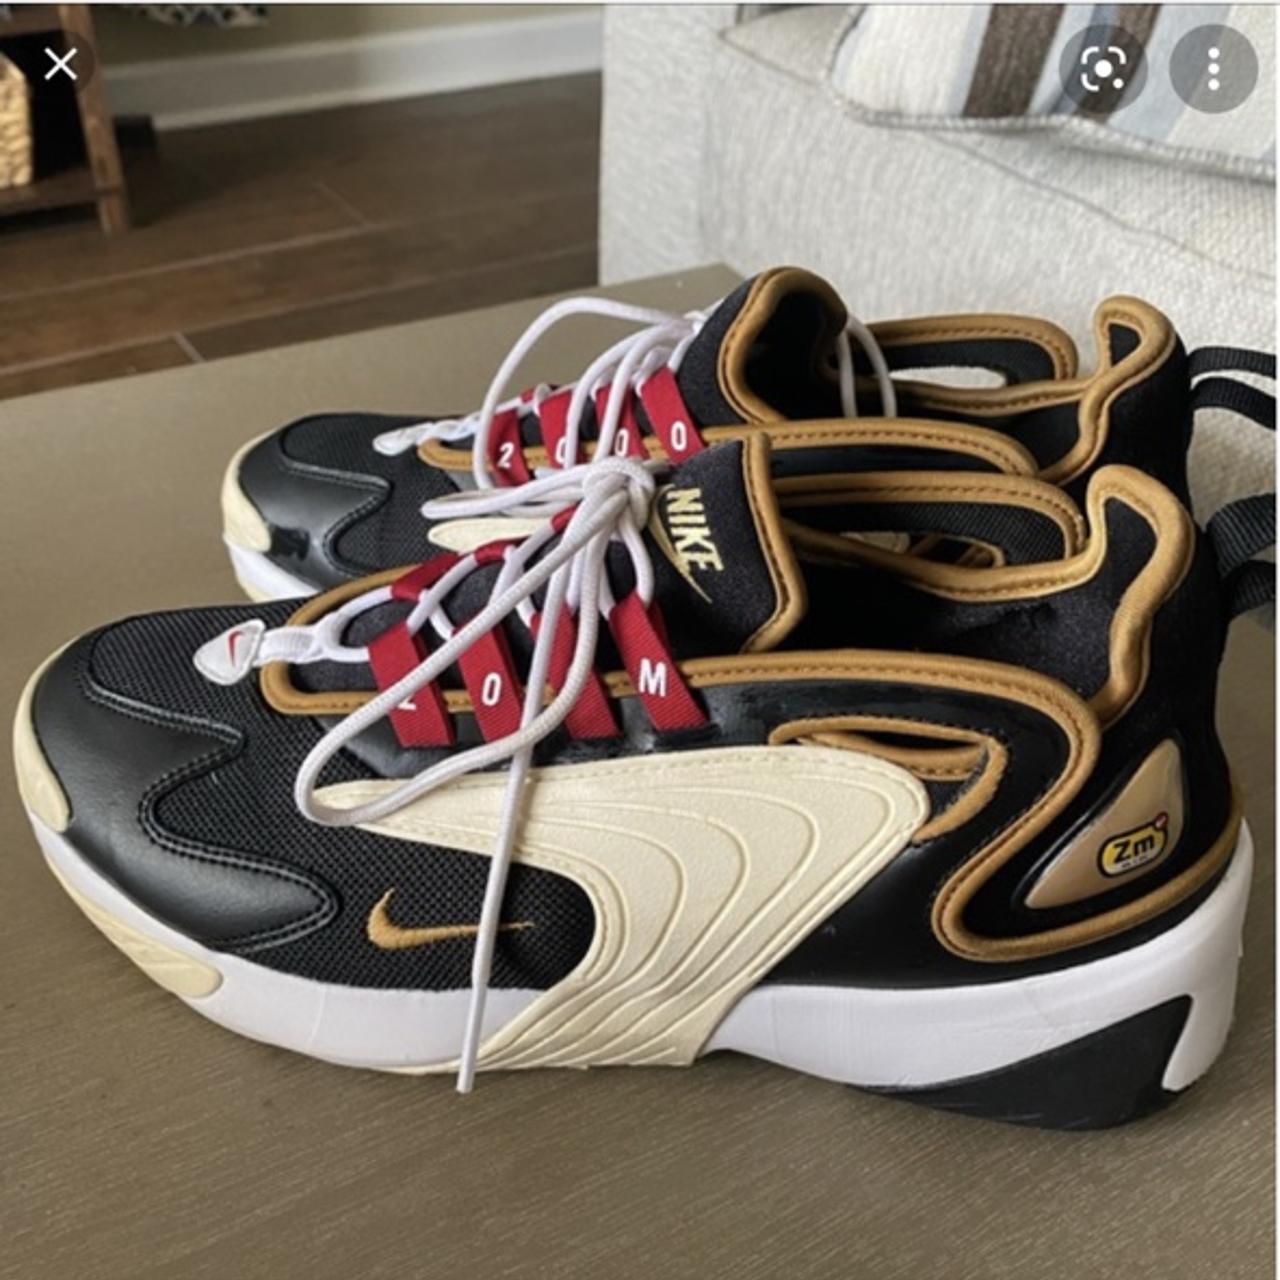 Nike zoom 2k and gold sneakers Too small for... -